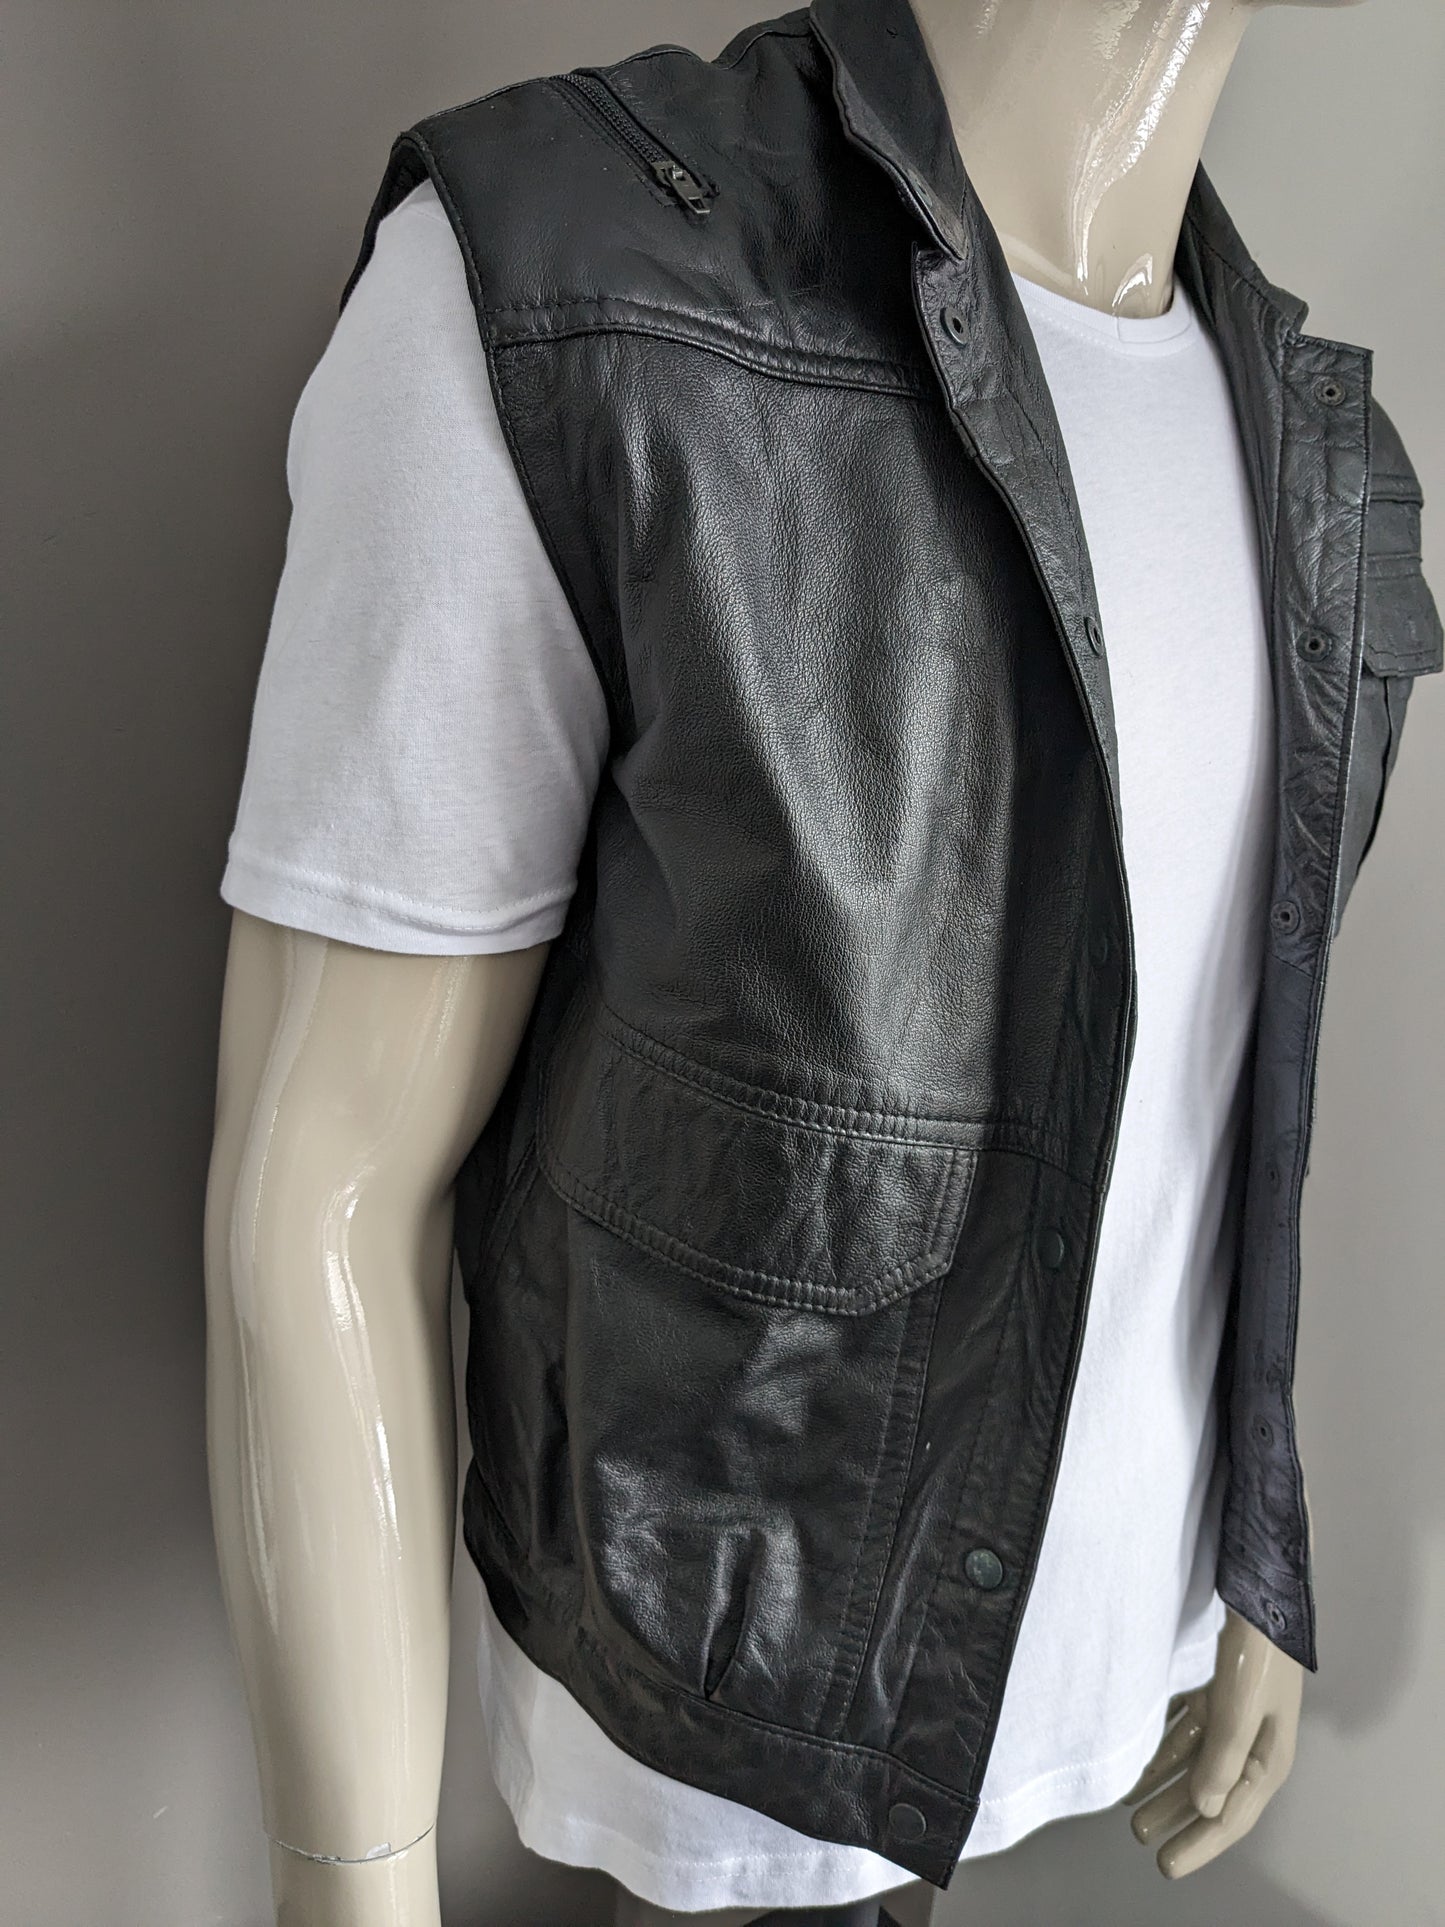 Vintage 80's C&A leather body warmer / waistcoat with bags, zipper applications and press studs. Black. Size M.